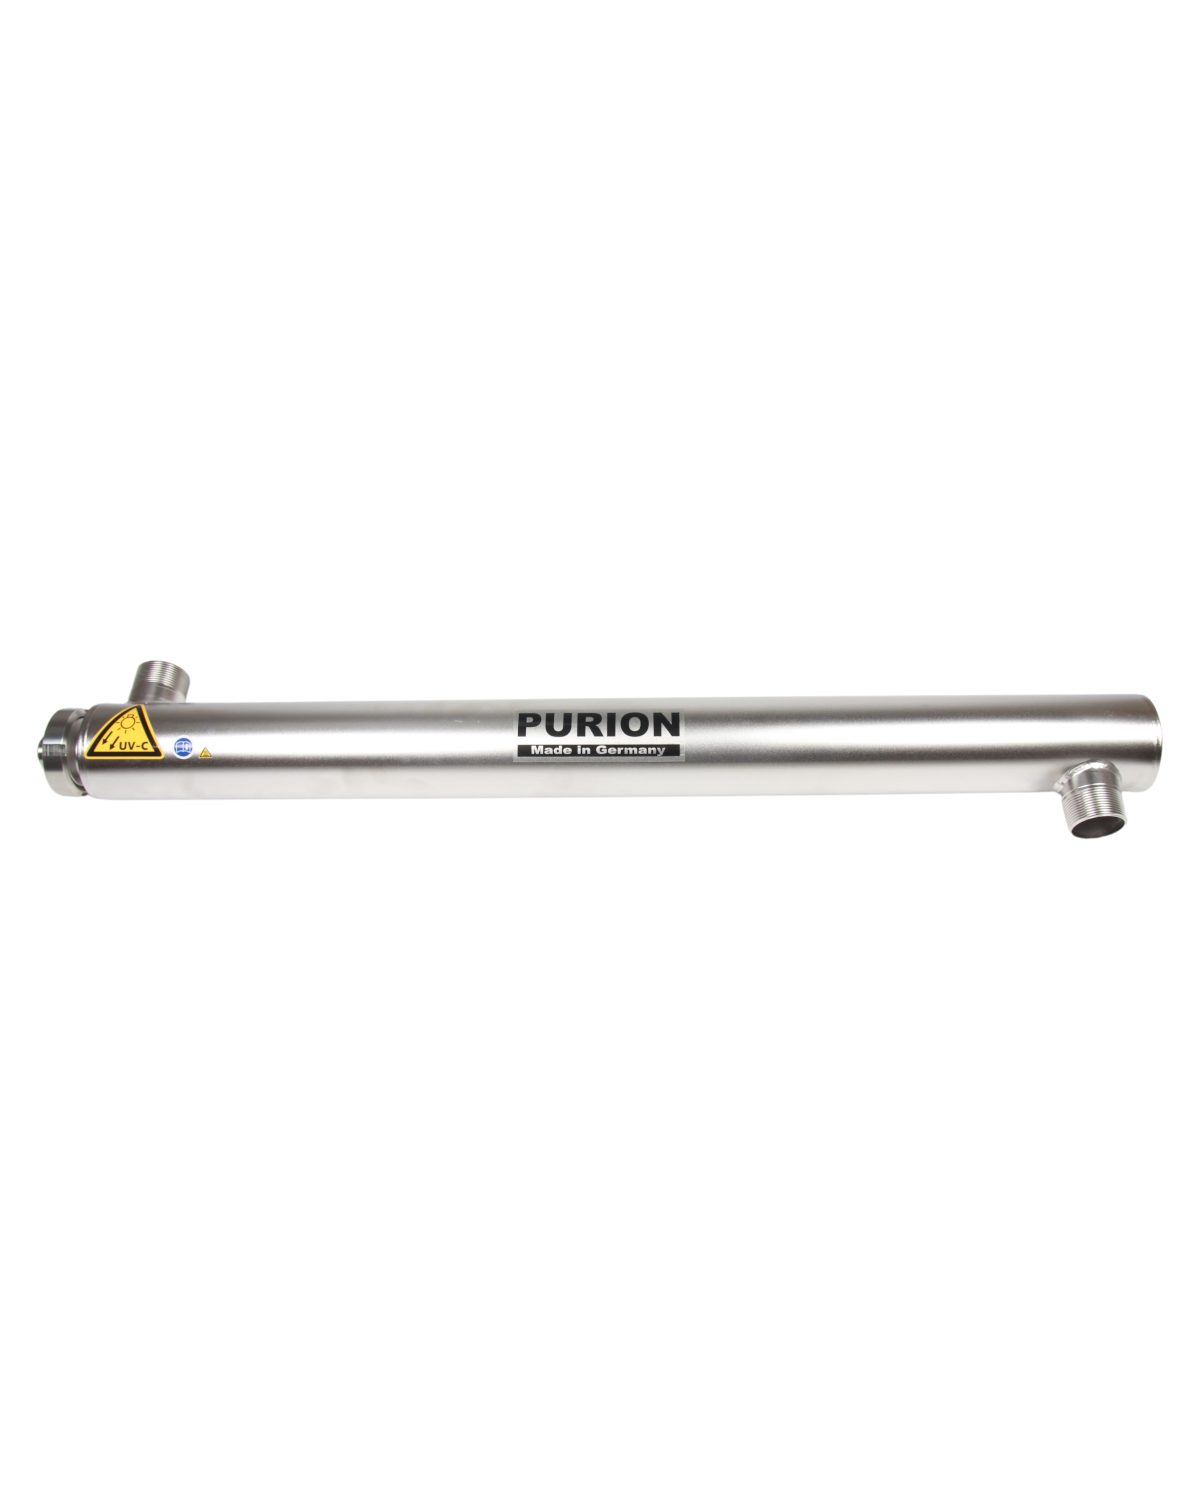 PURION 2501 OPD Extra